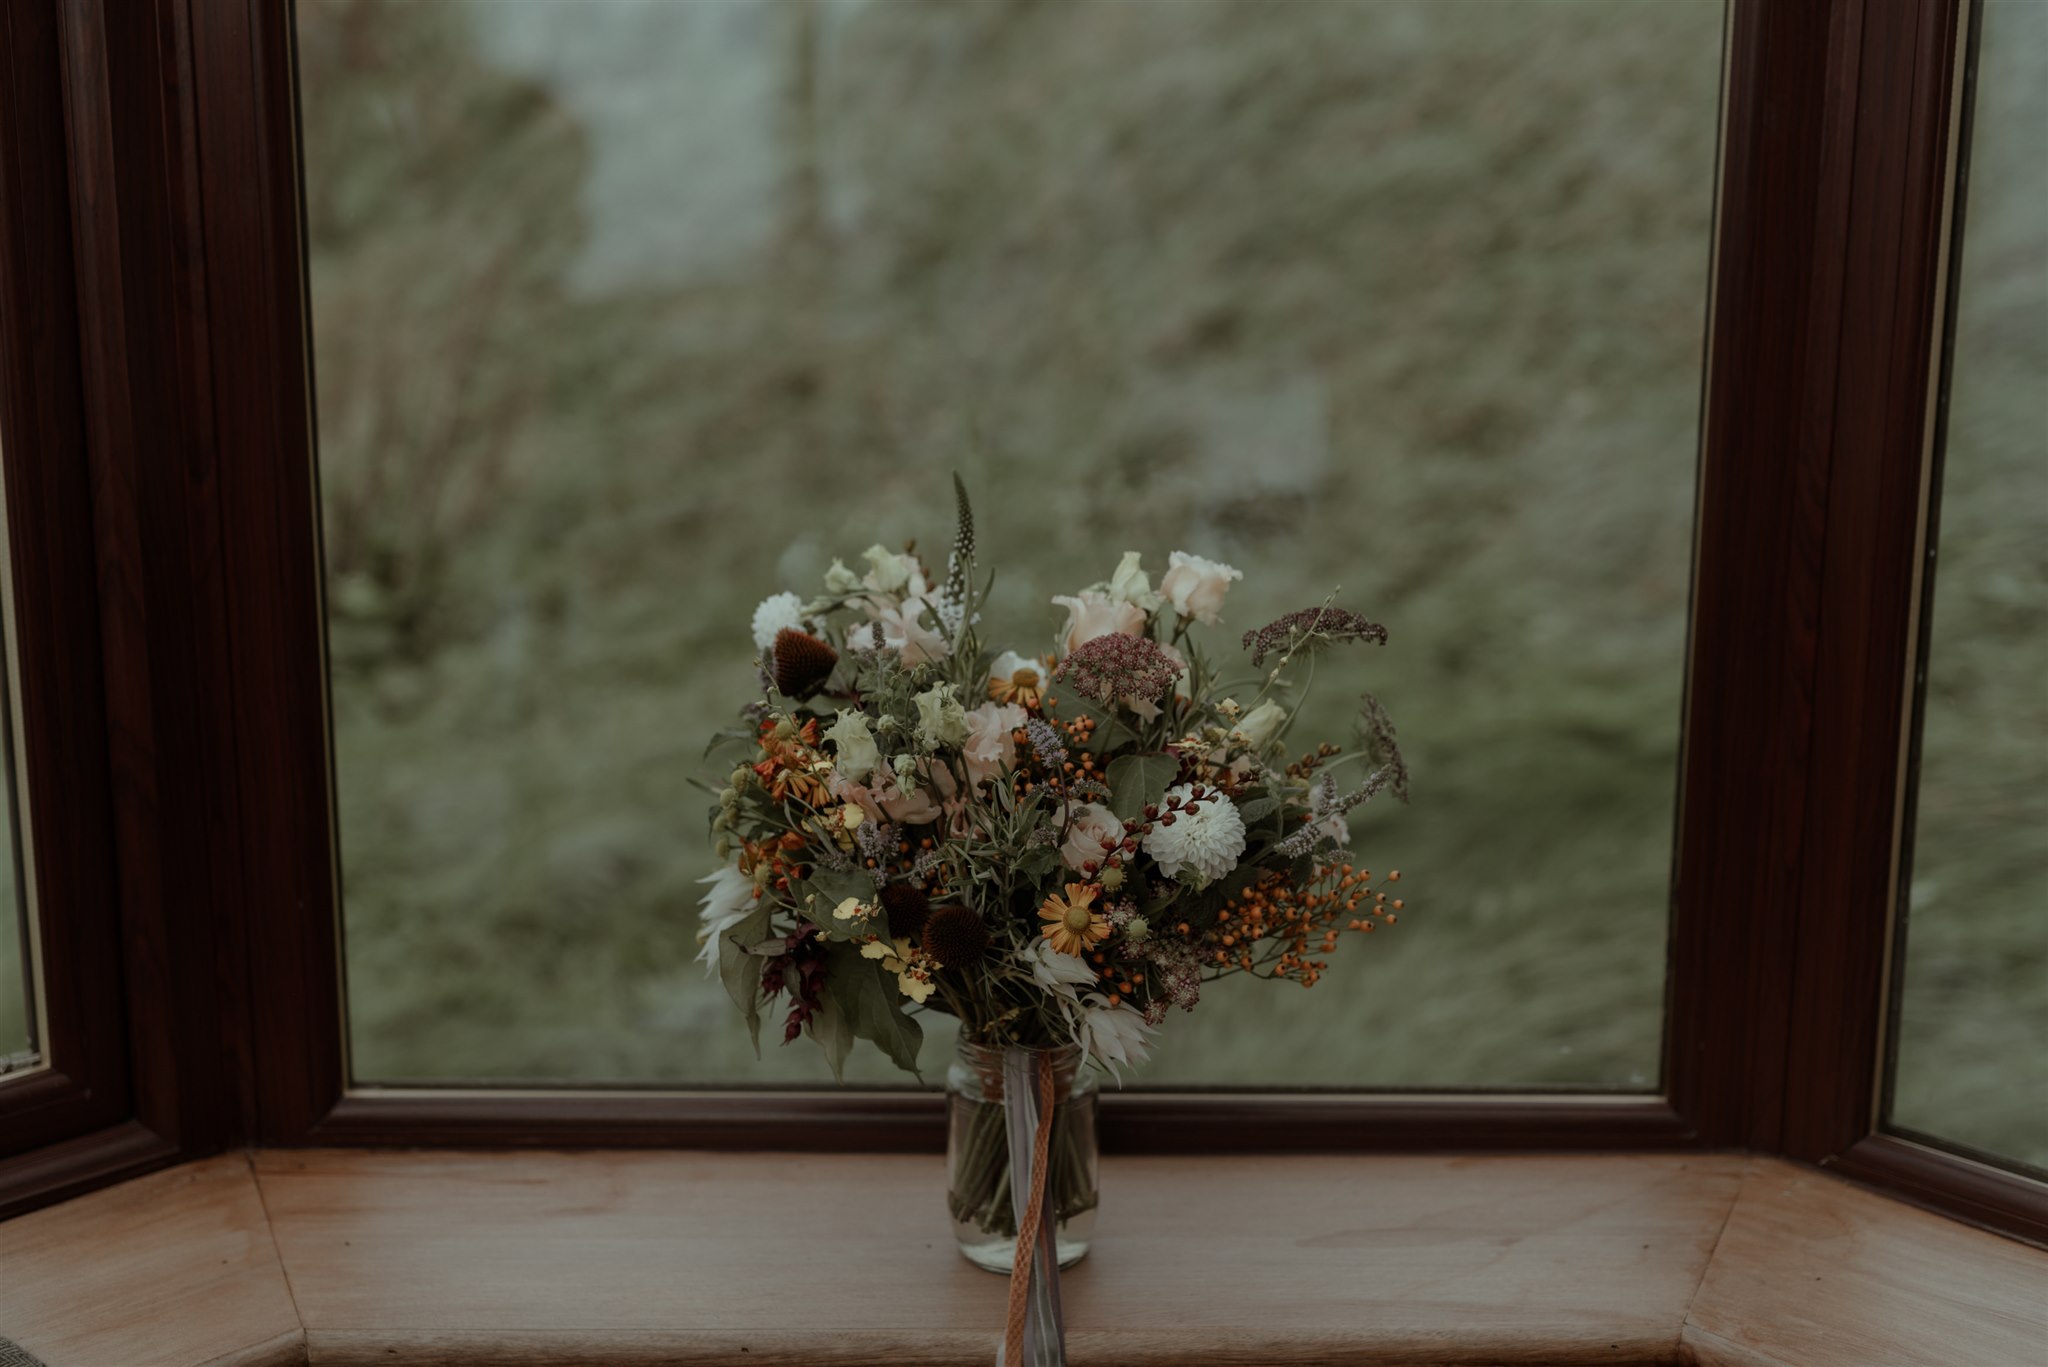 Isle of Skye elopement photography modern dreamy whimsical and romantic plus video